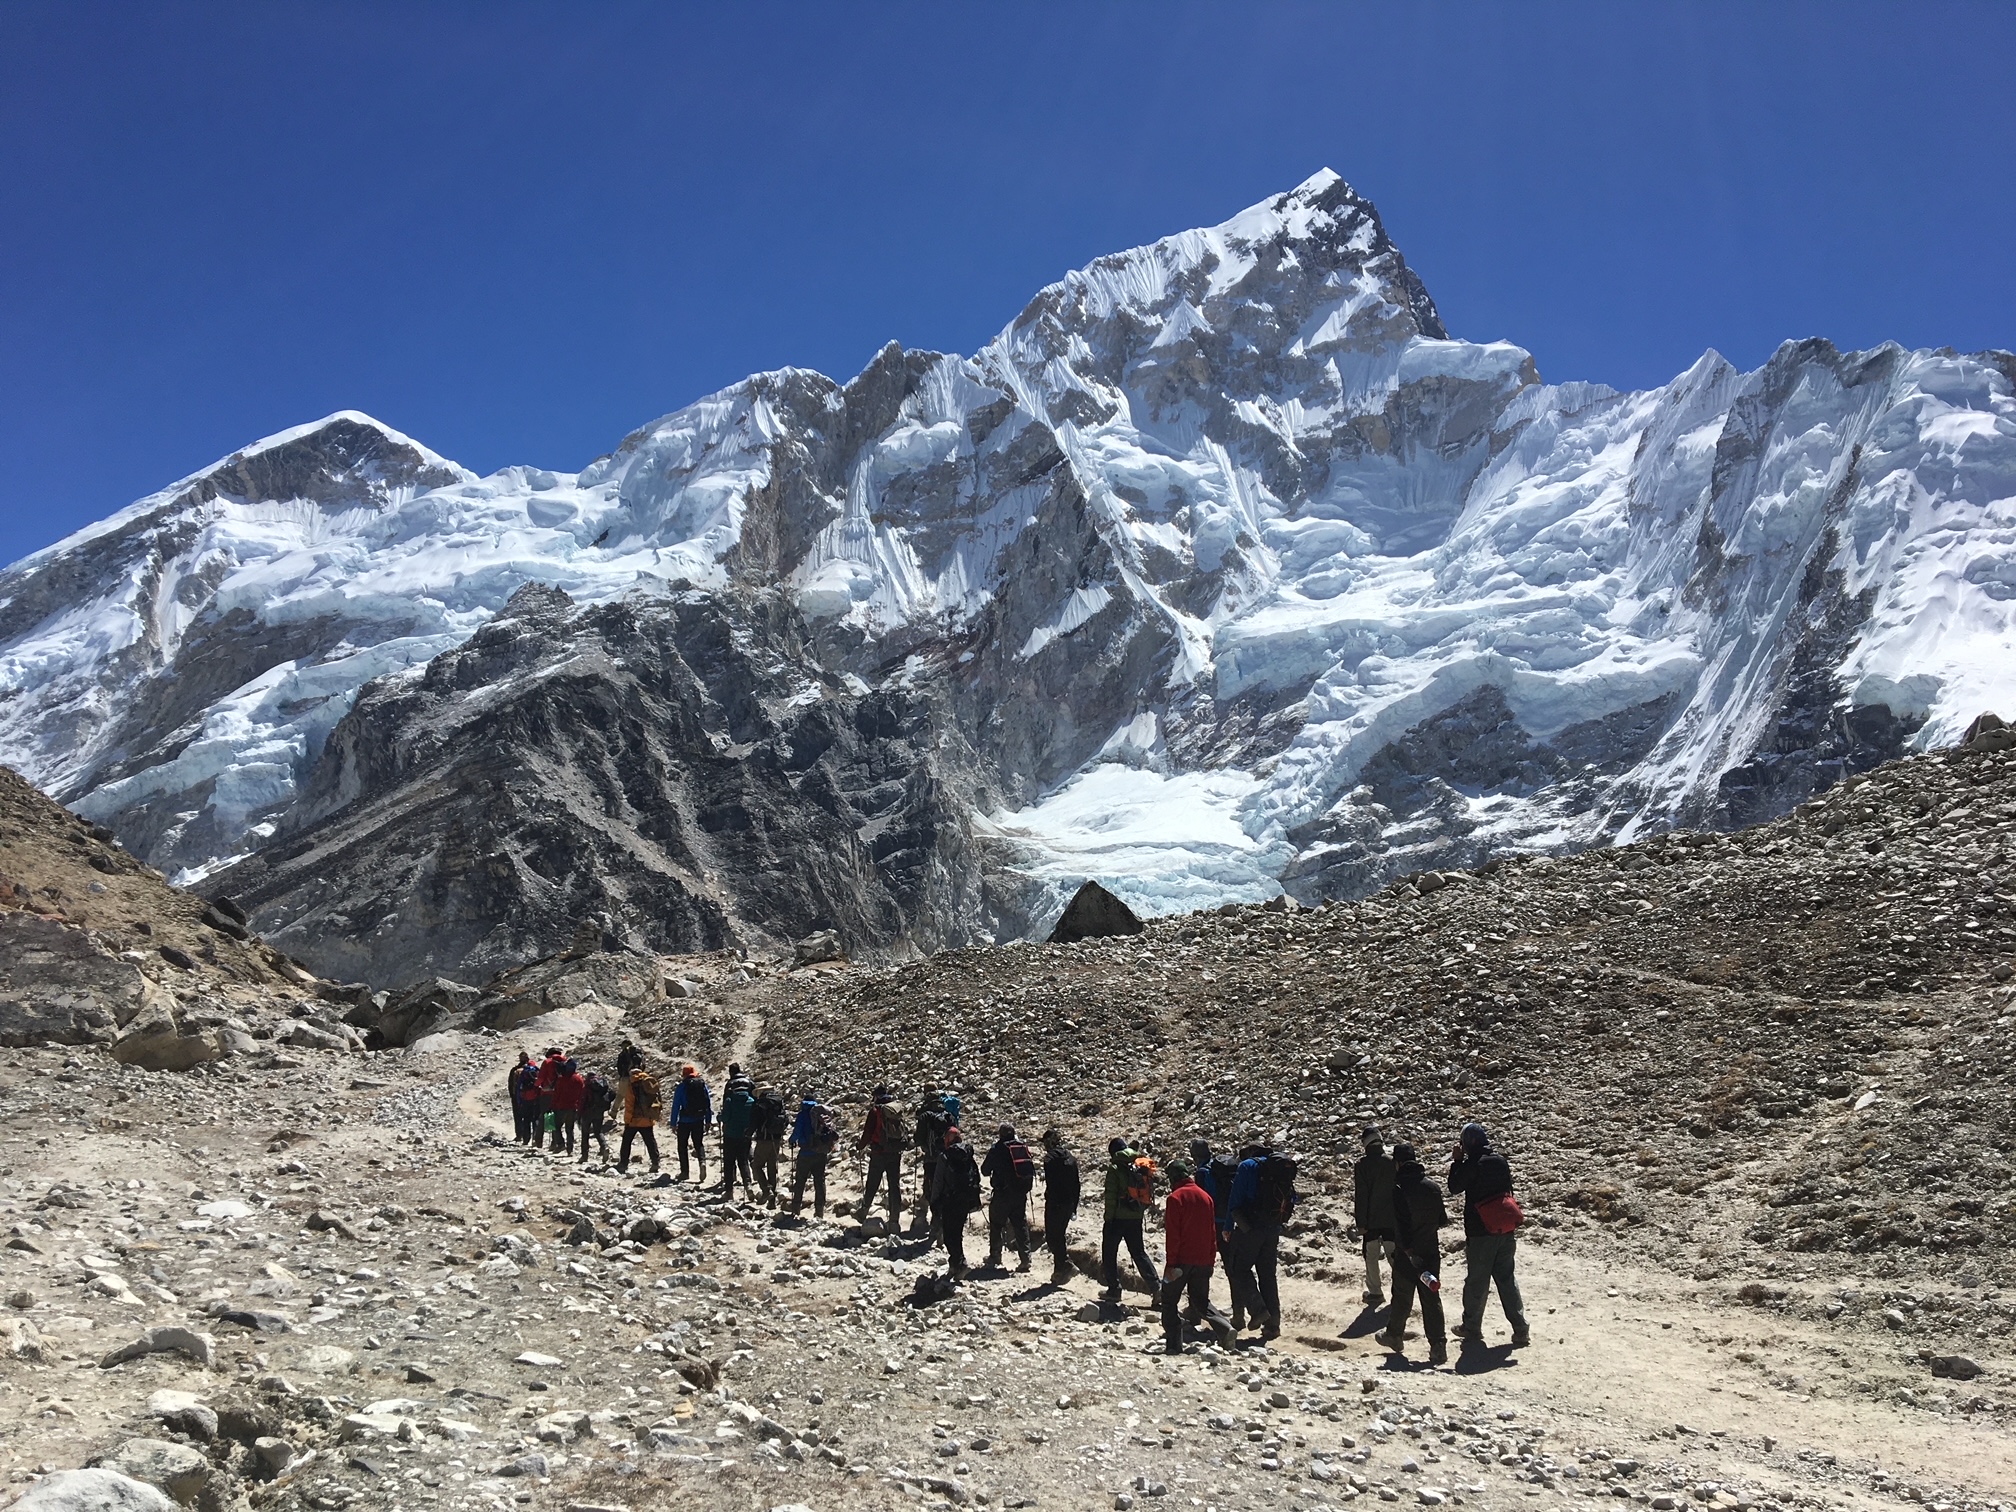 The route to Everest Base Camp